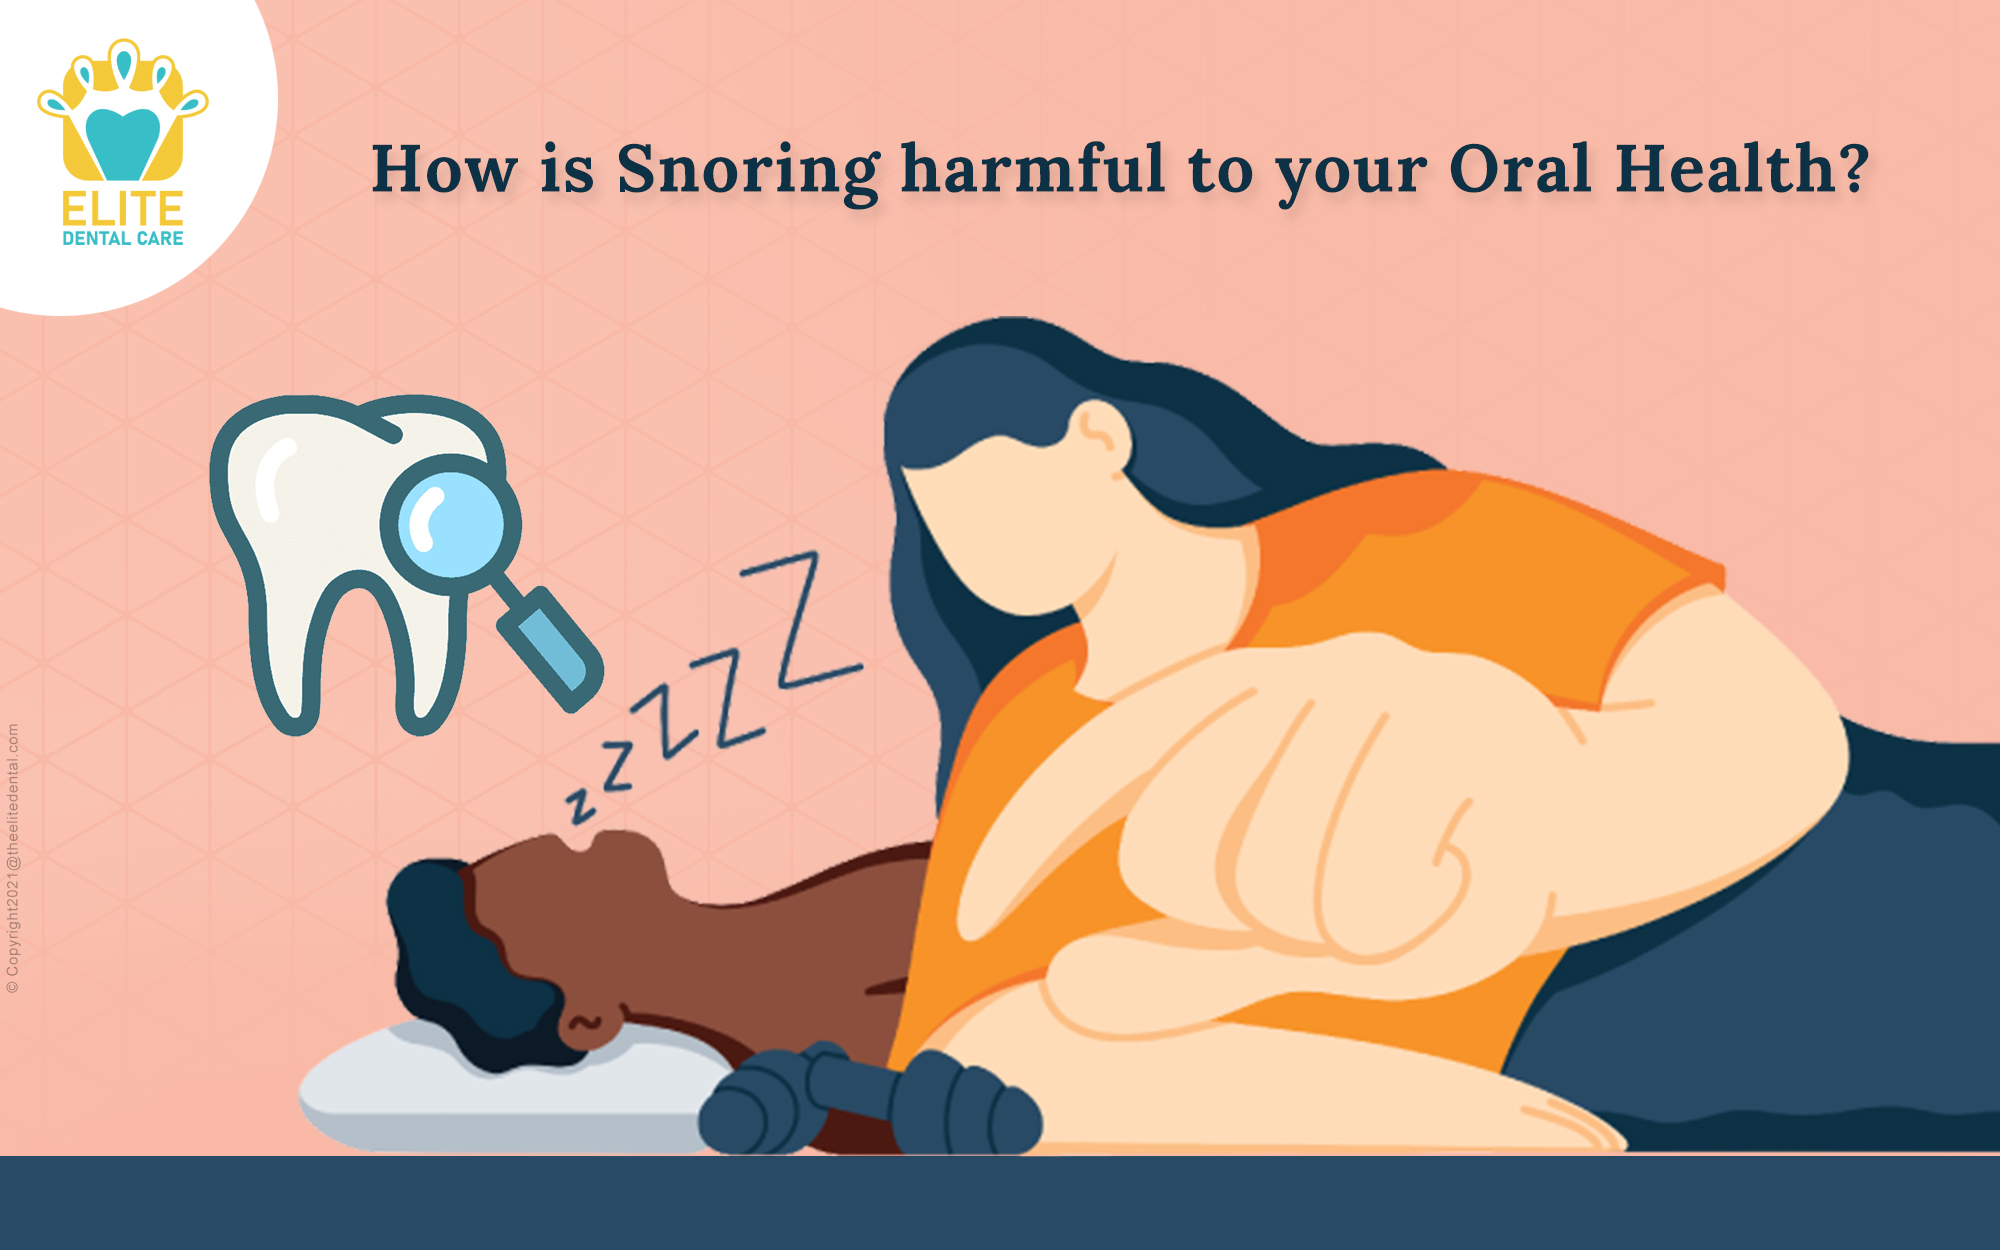 How is snoring harmful to your oral health?